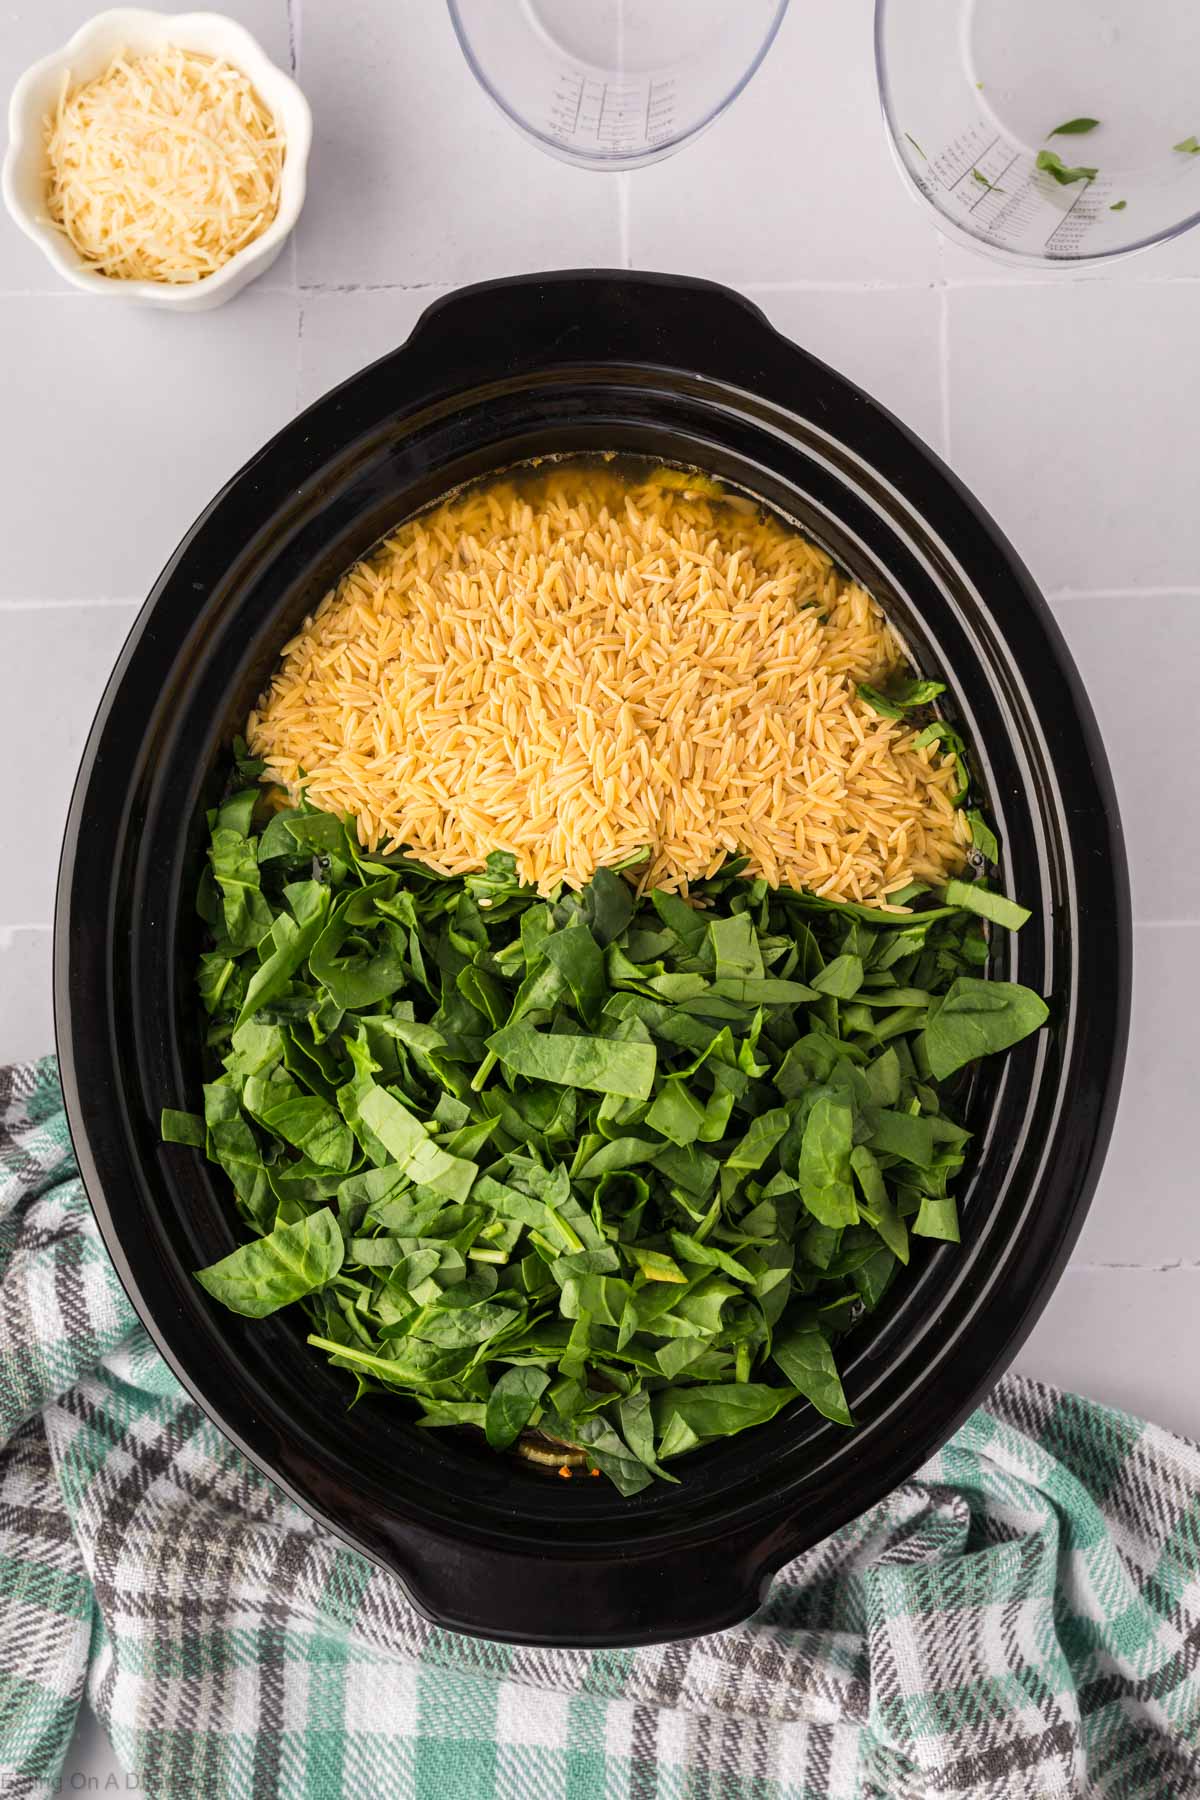 Adding the spinach and Orzo to the slow cooker